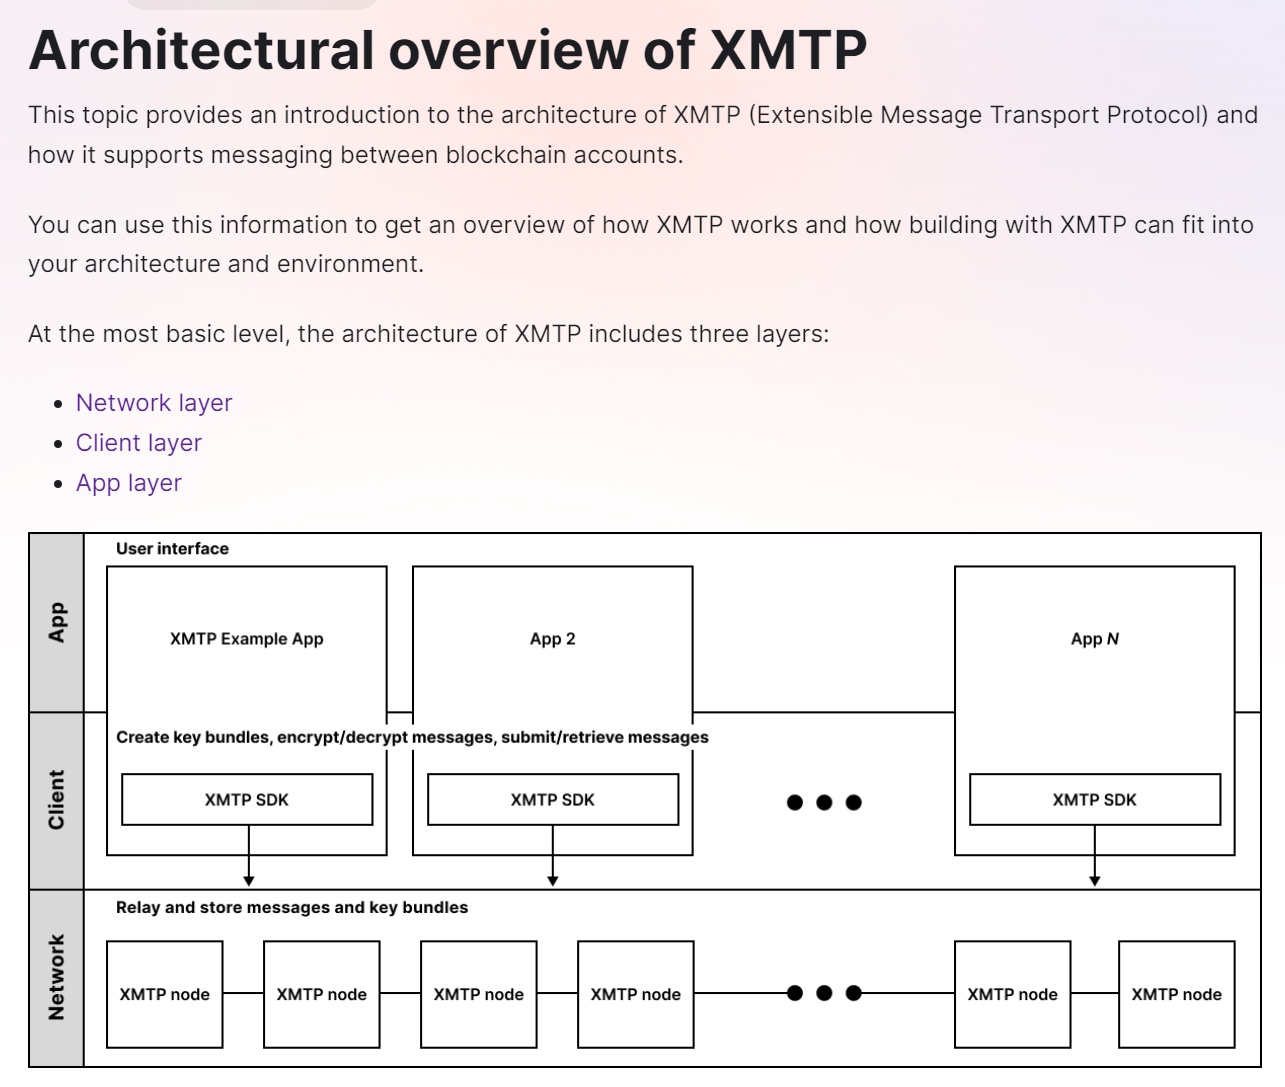 XMTP product / service